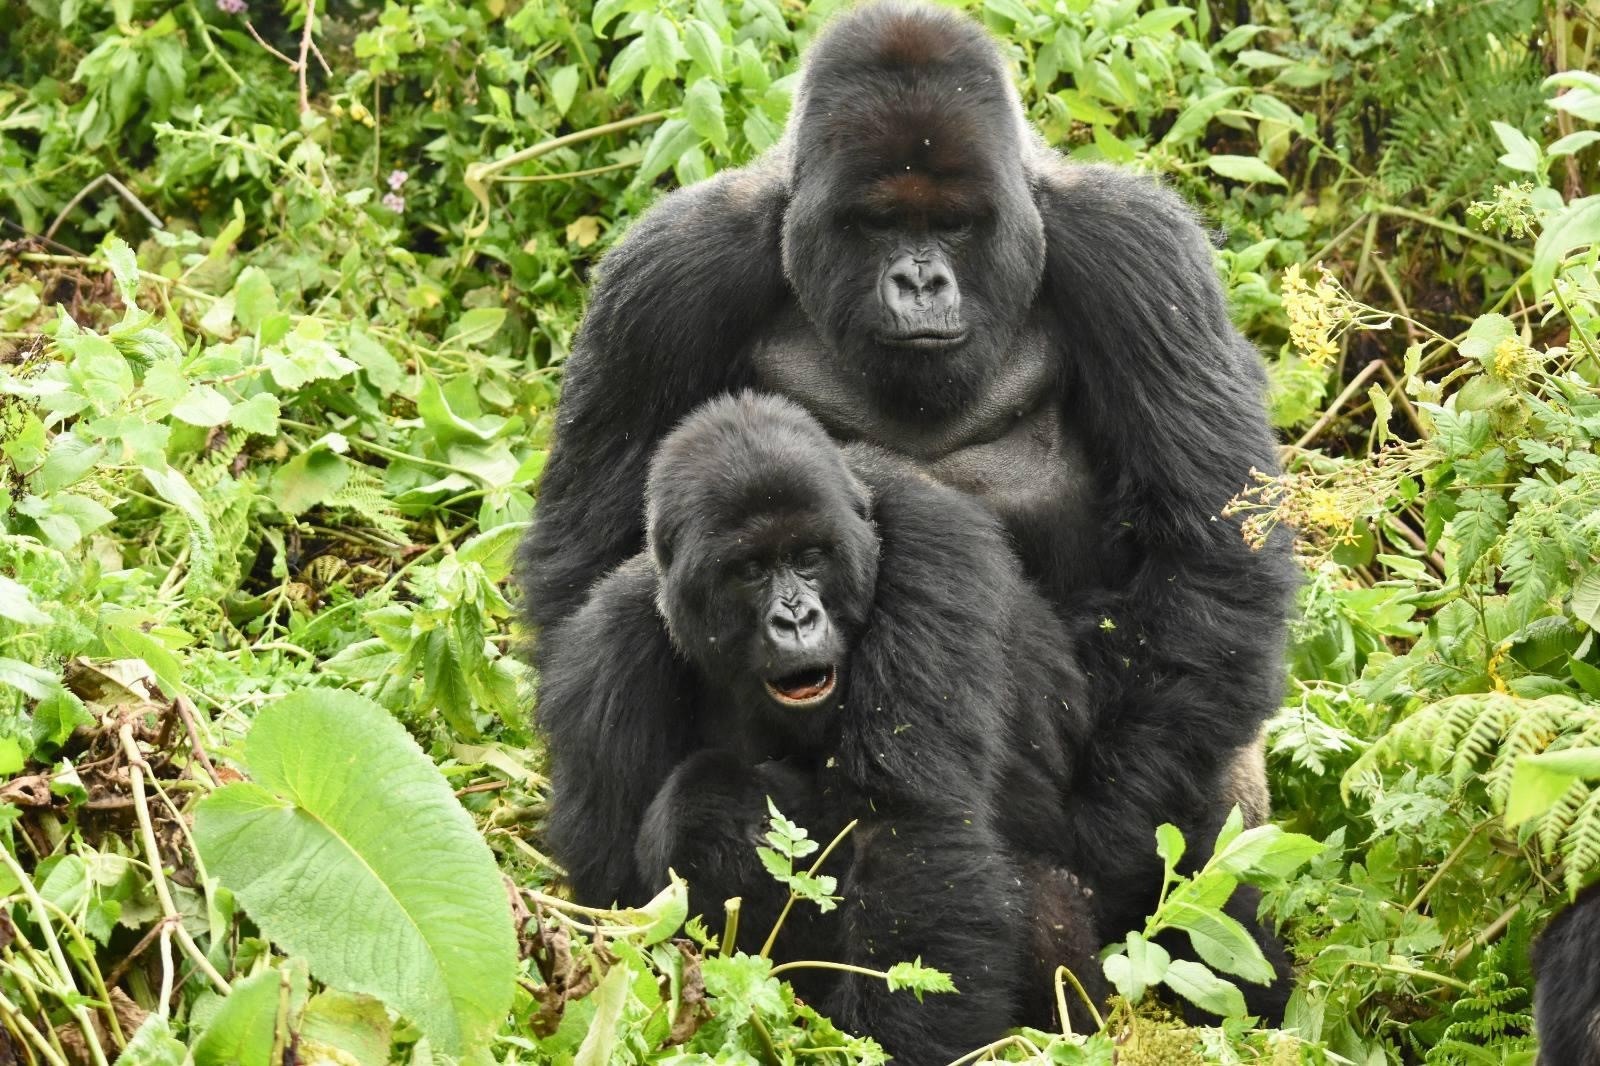 What Sickness Does Mountain Gorillas Suffer?